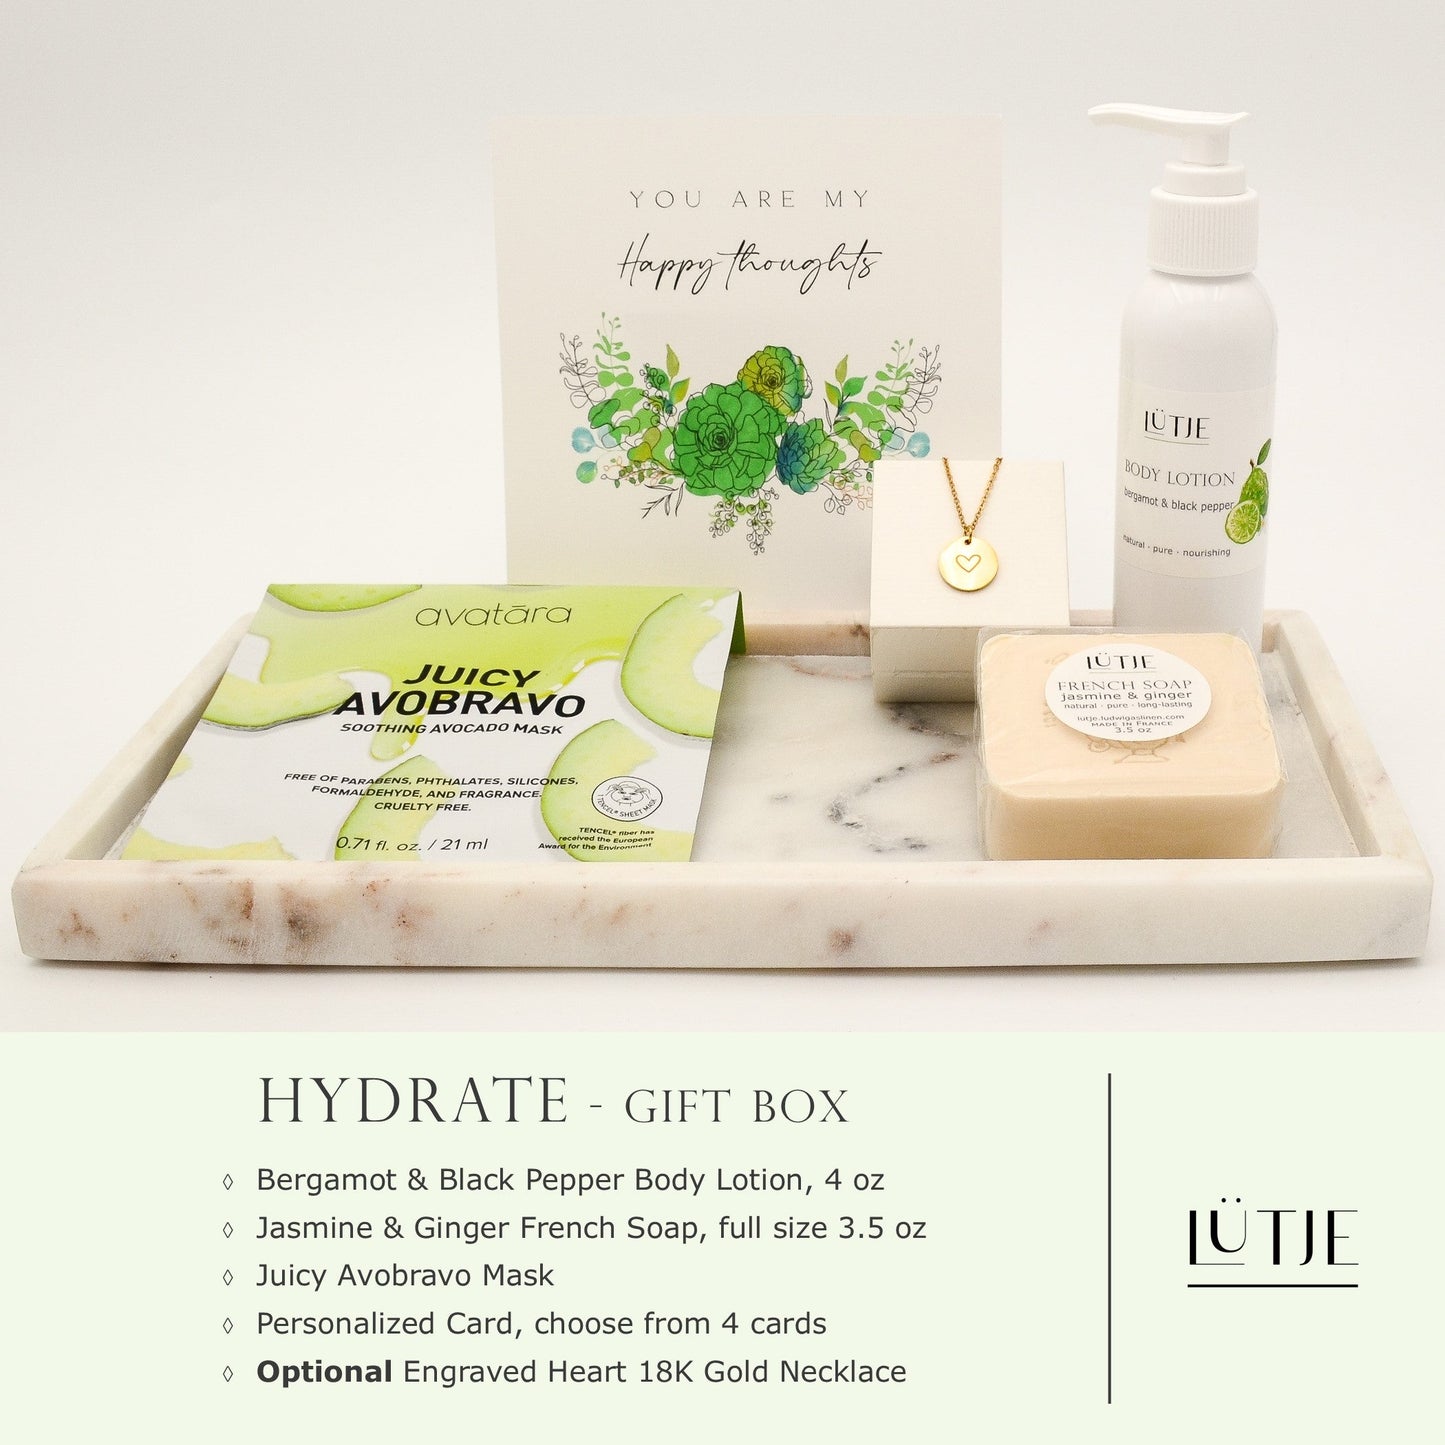 Hydrate Gift Box for women, daughter, mom, BFF, wife, sister or grandma, includes Bergamot & Black Pepper body lotion, French soap, hydrating face mask, and optional 18K gold-plated necklace with engraved heart.